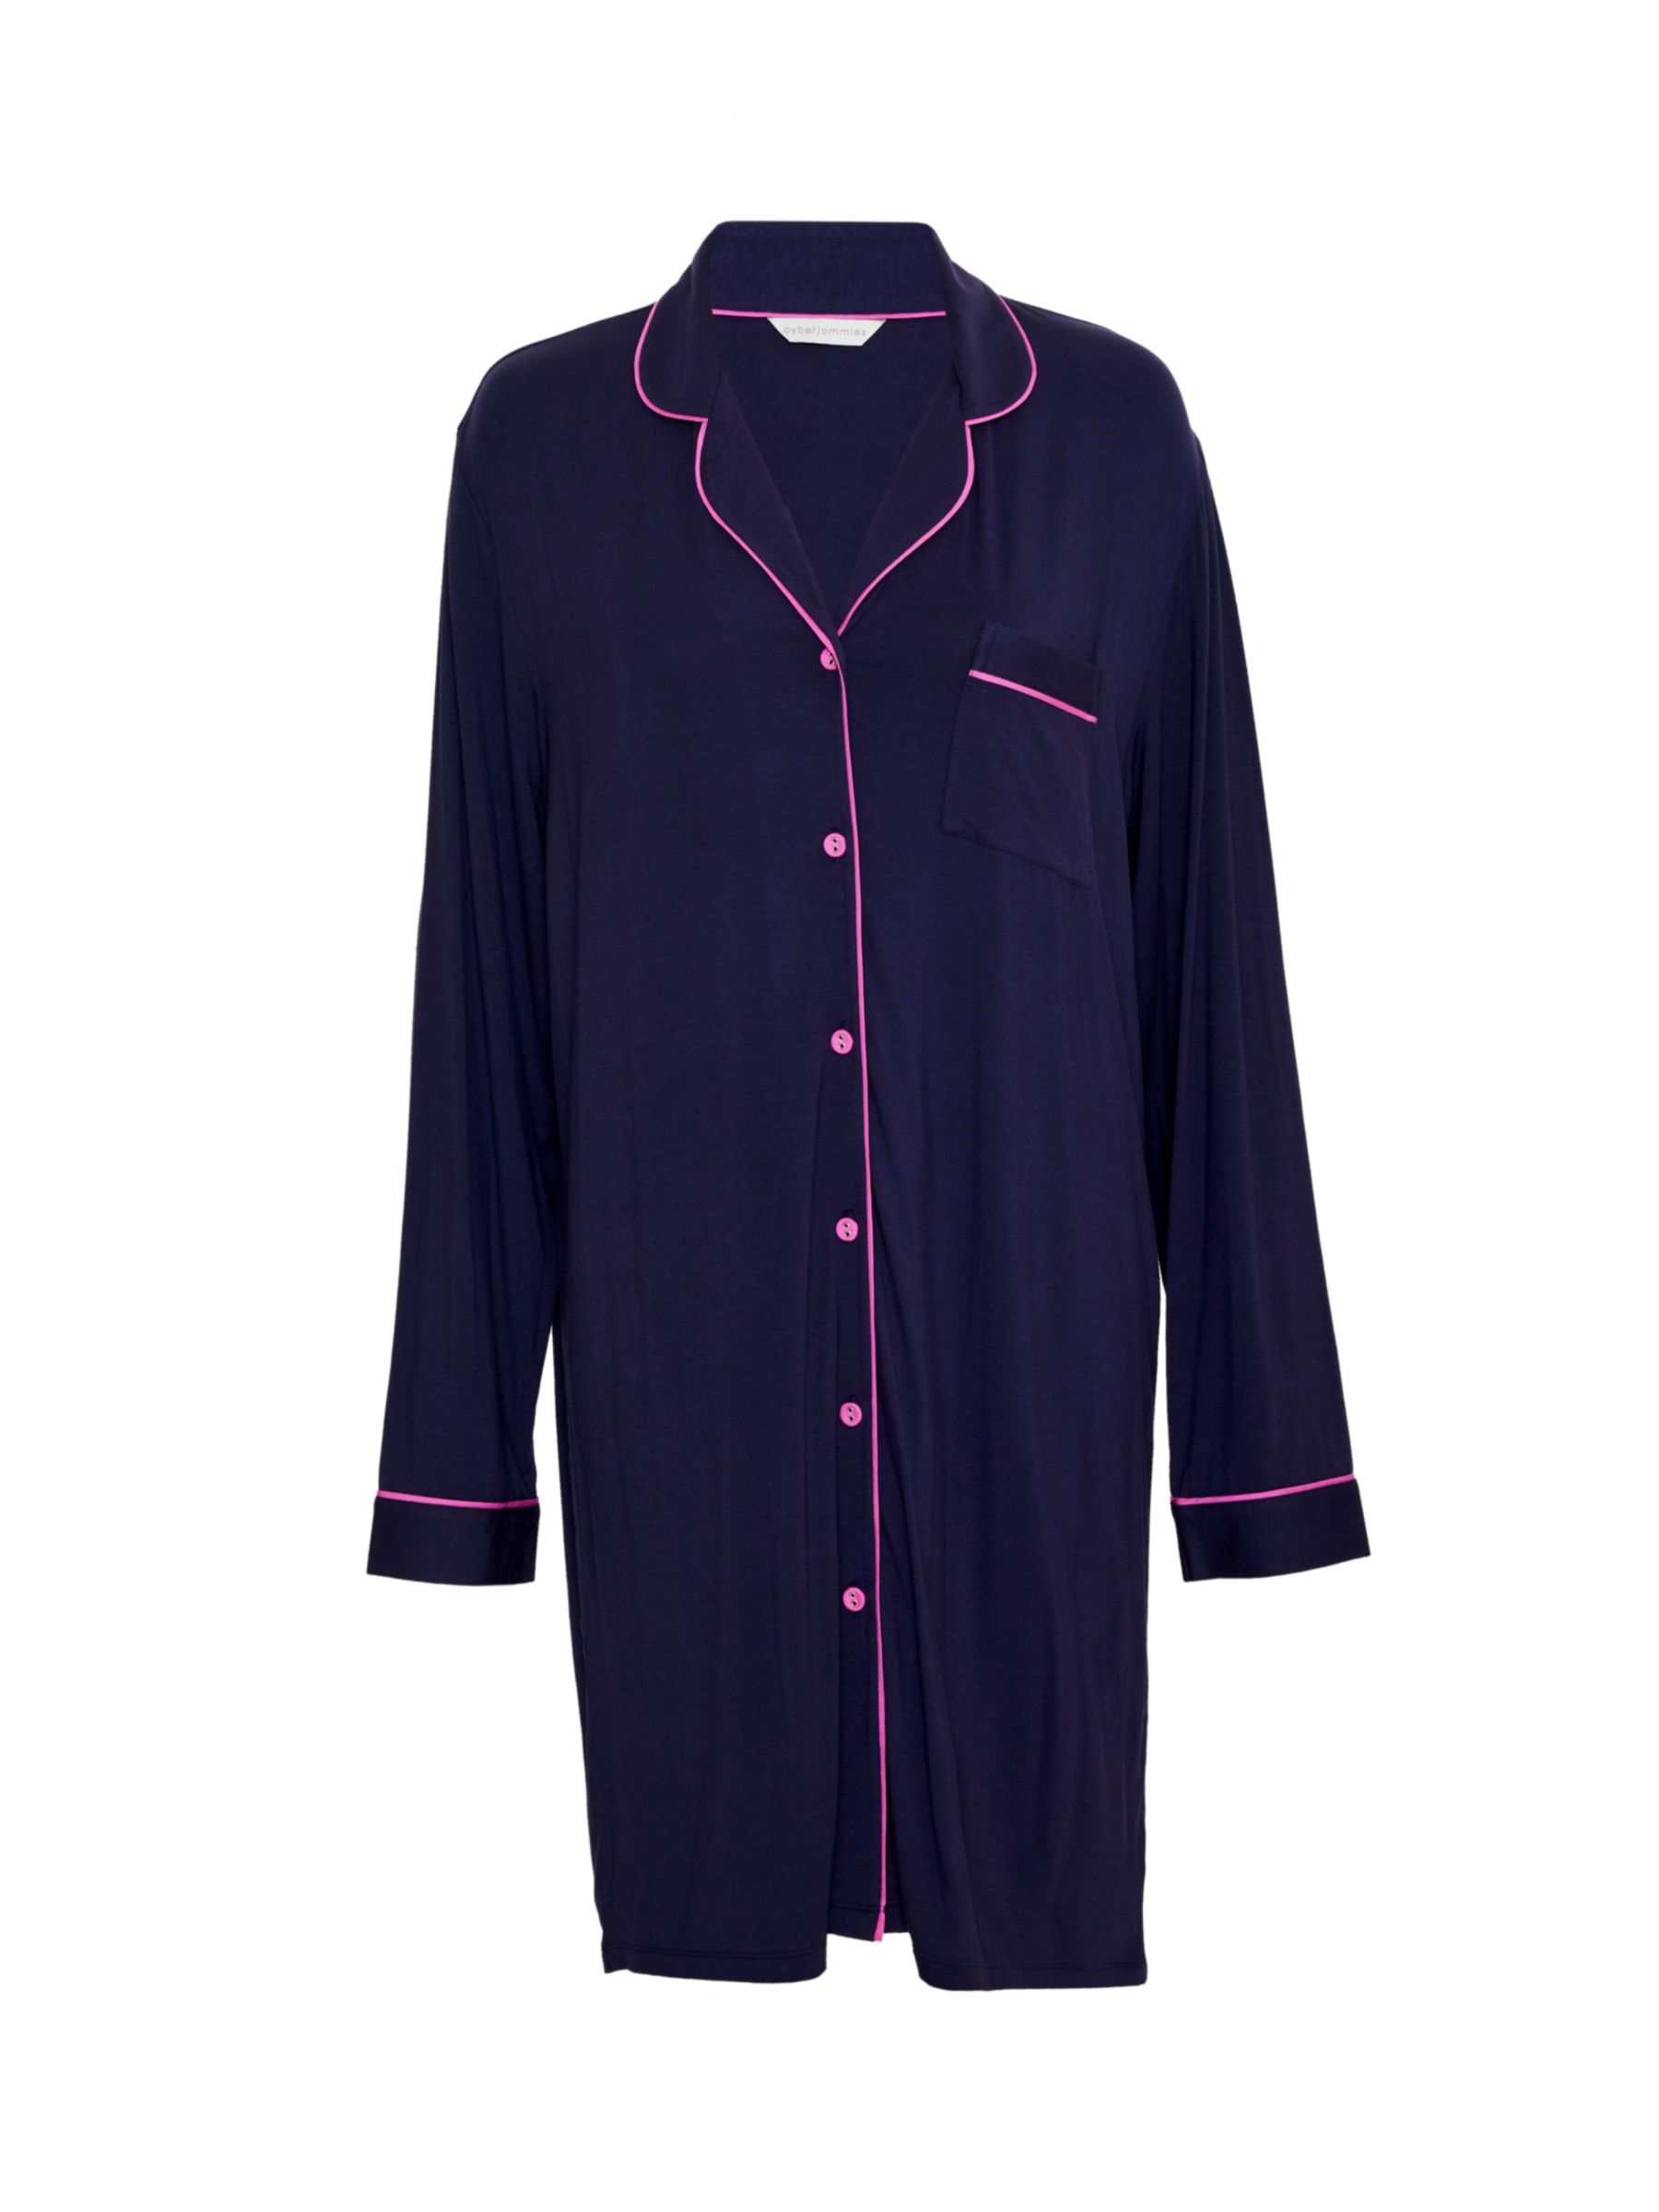 Cyberjammies Avery Piped Jersey Nightshirt, Navy, 28